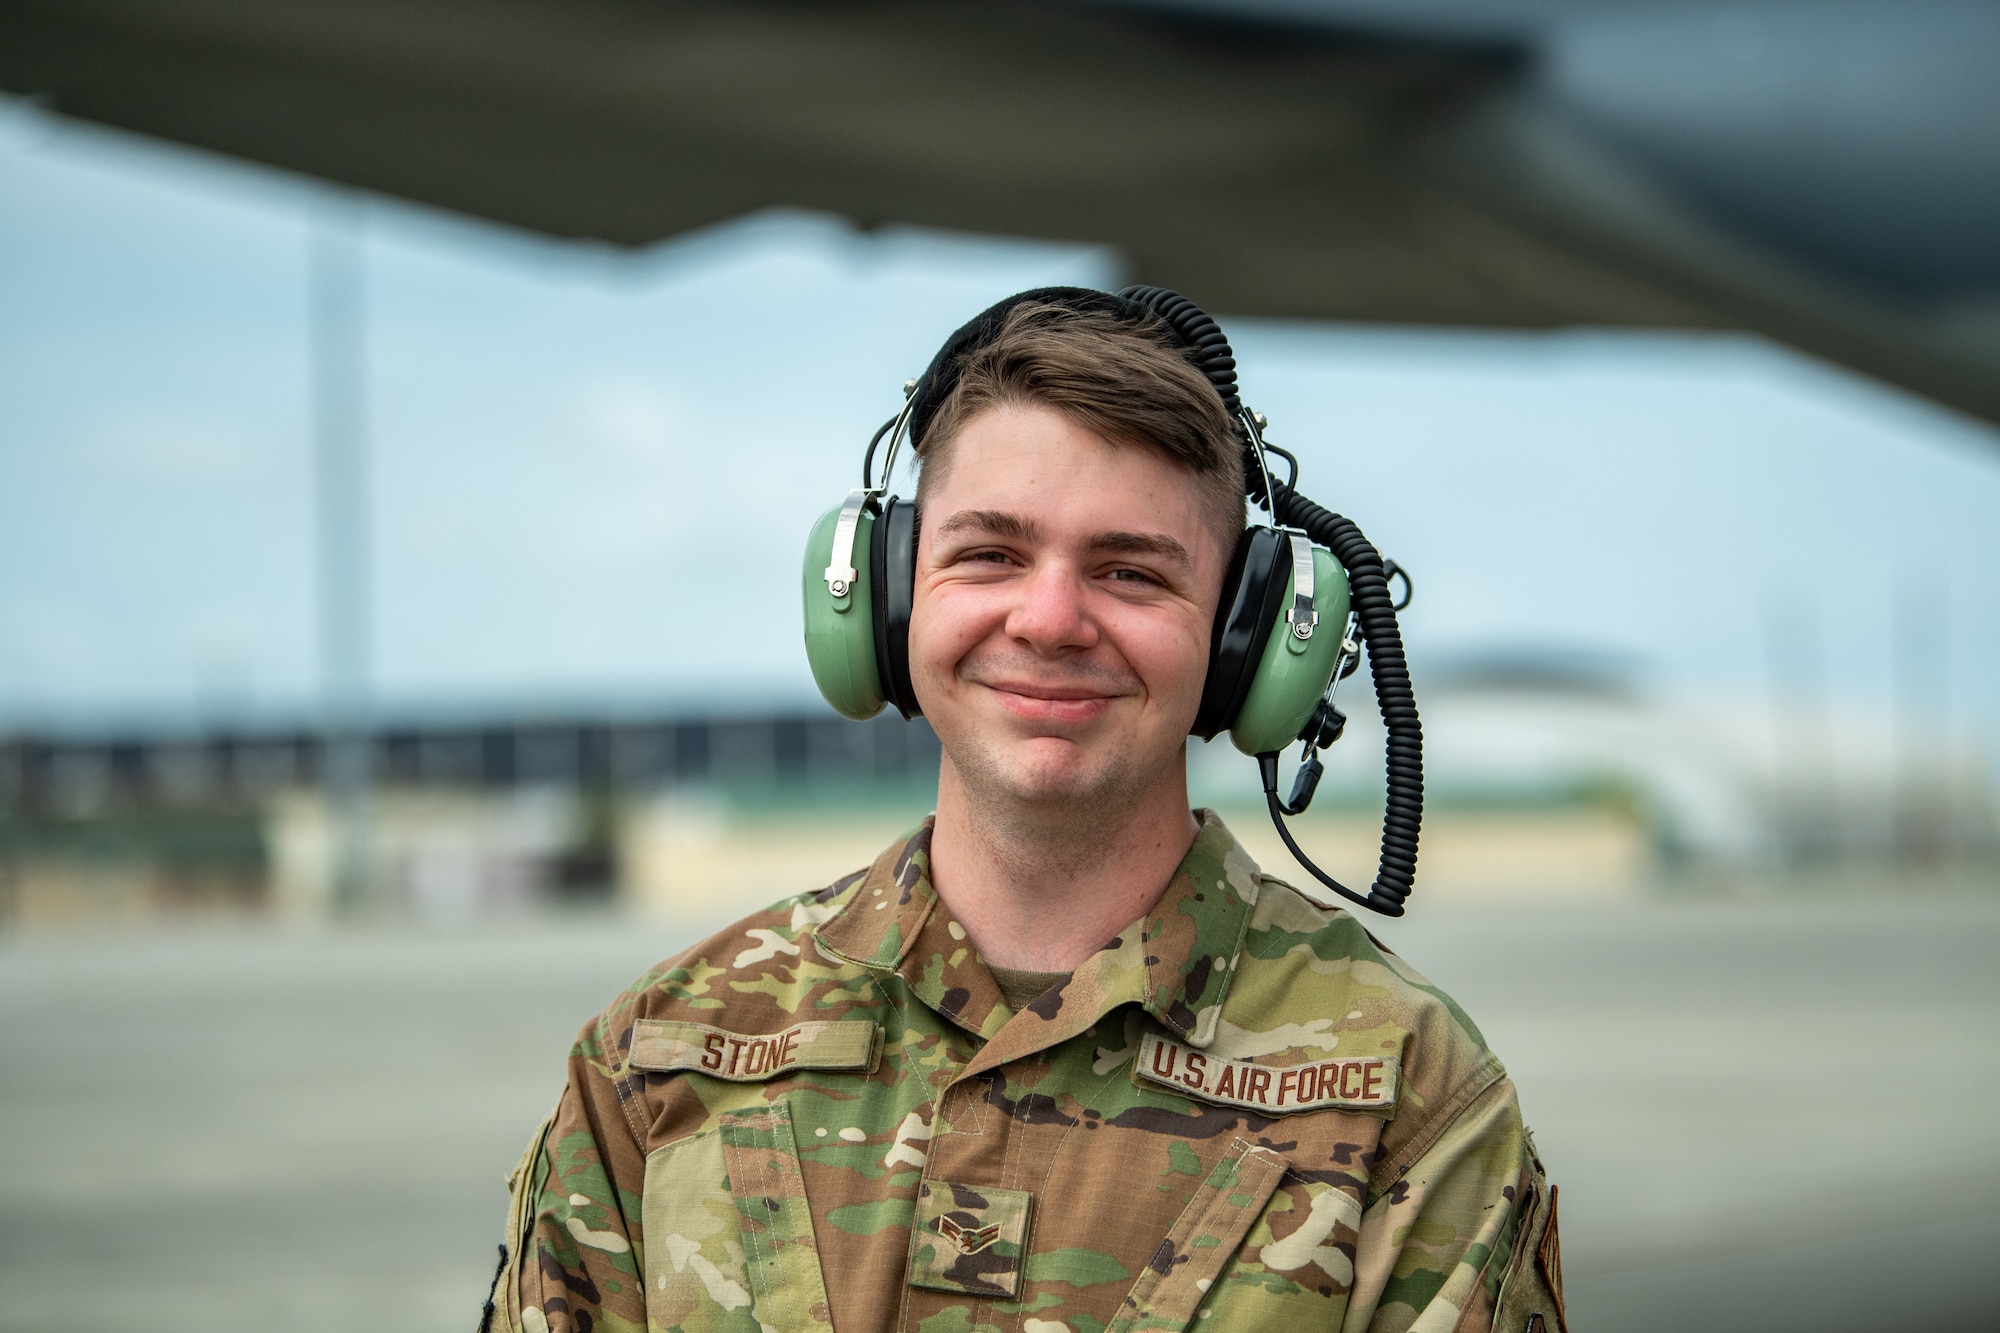 U.S. Air Force Airman 1st Class Ethan Stone, 71st Rescue Generation Squadron hydraulics, poses for a photo during Exercise Ready Tiger 24-1 at Savannah Air National Guard Base, Georgia, April 10, 2024. During Ready Tiger 24-1, the 23rd Wing will be evaluated on the integration of Air Force Force Generation principles such as Agile Combat Employment, integrated combat turns, forward aerial refueling points, multi-capable Airmen, and combat search and rescue capabilities. (U.S. Air Force photo by Senior Airman Courtney Sebastianelli)